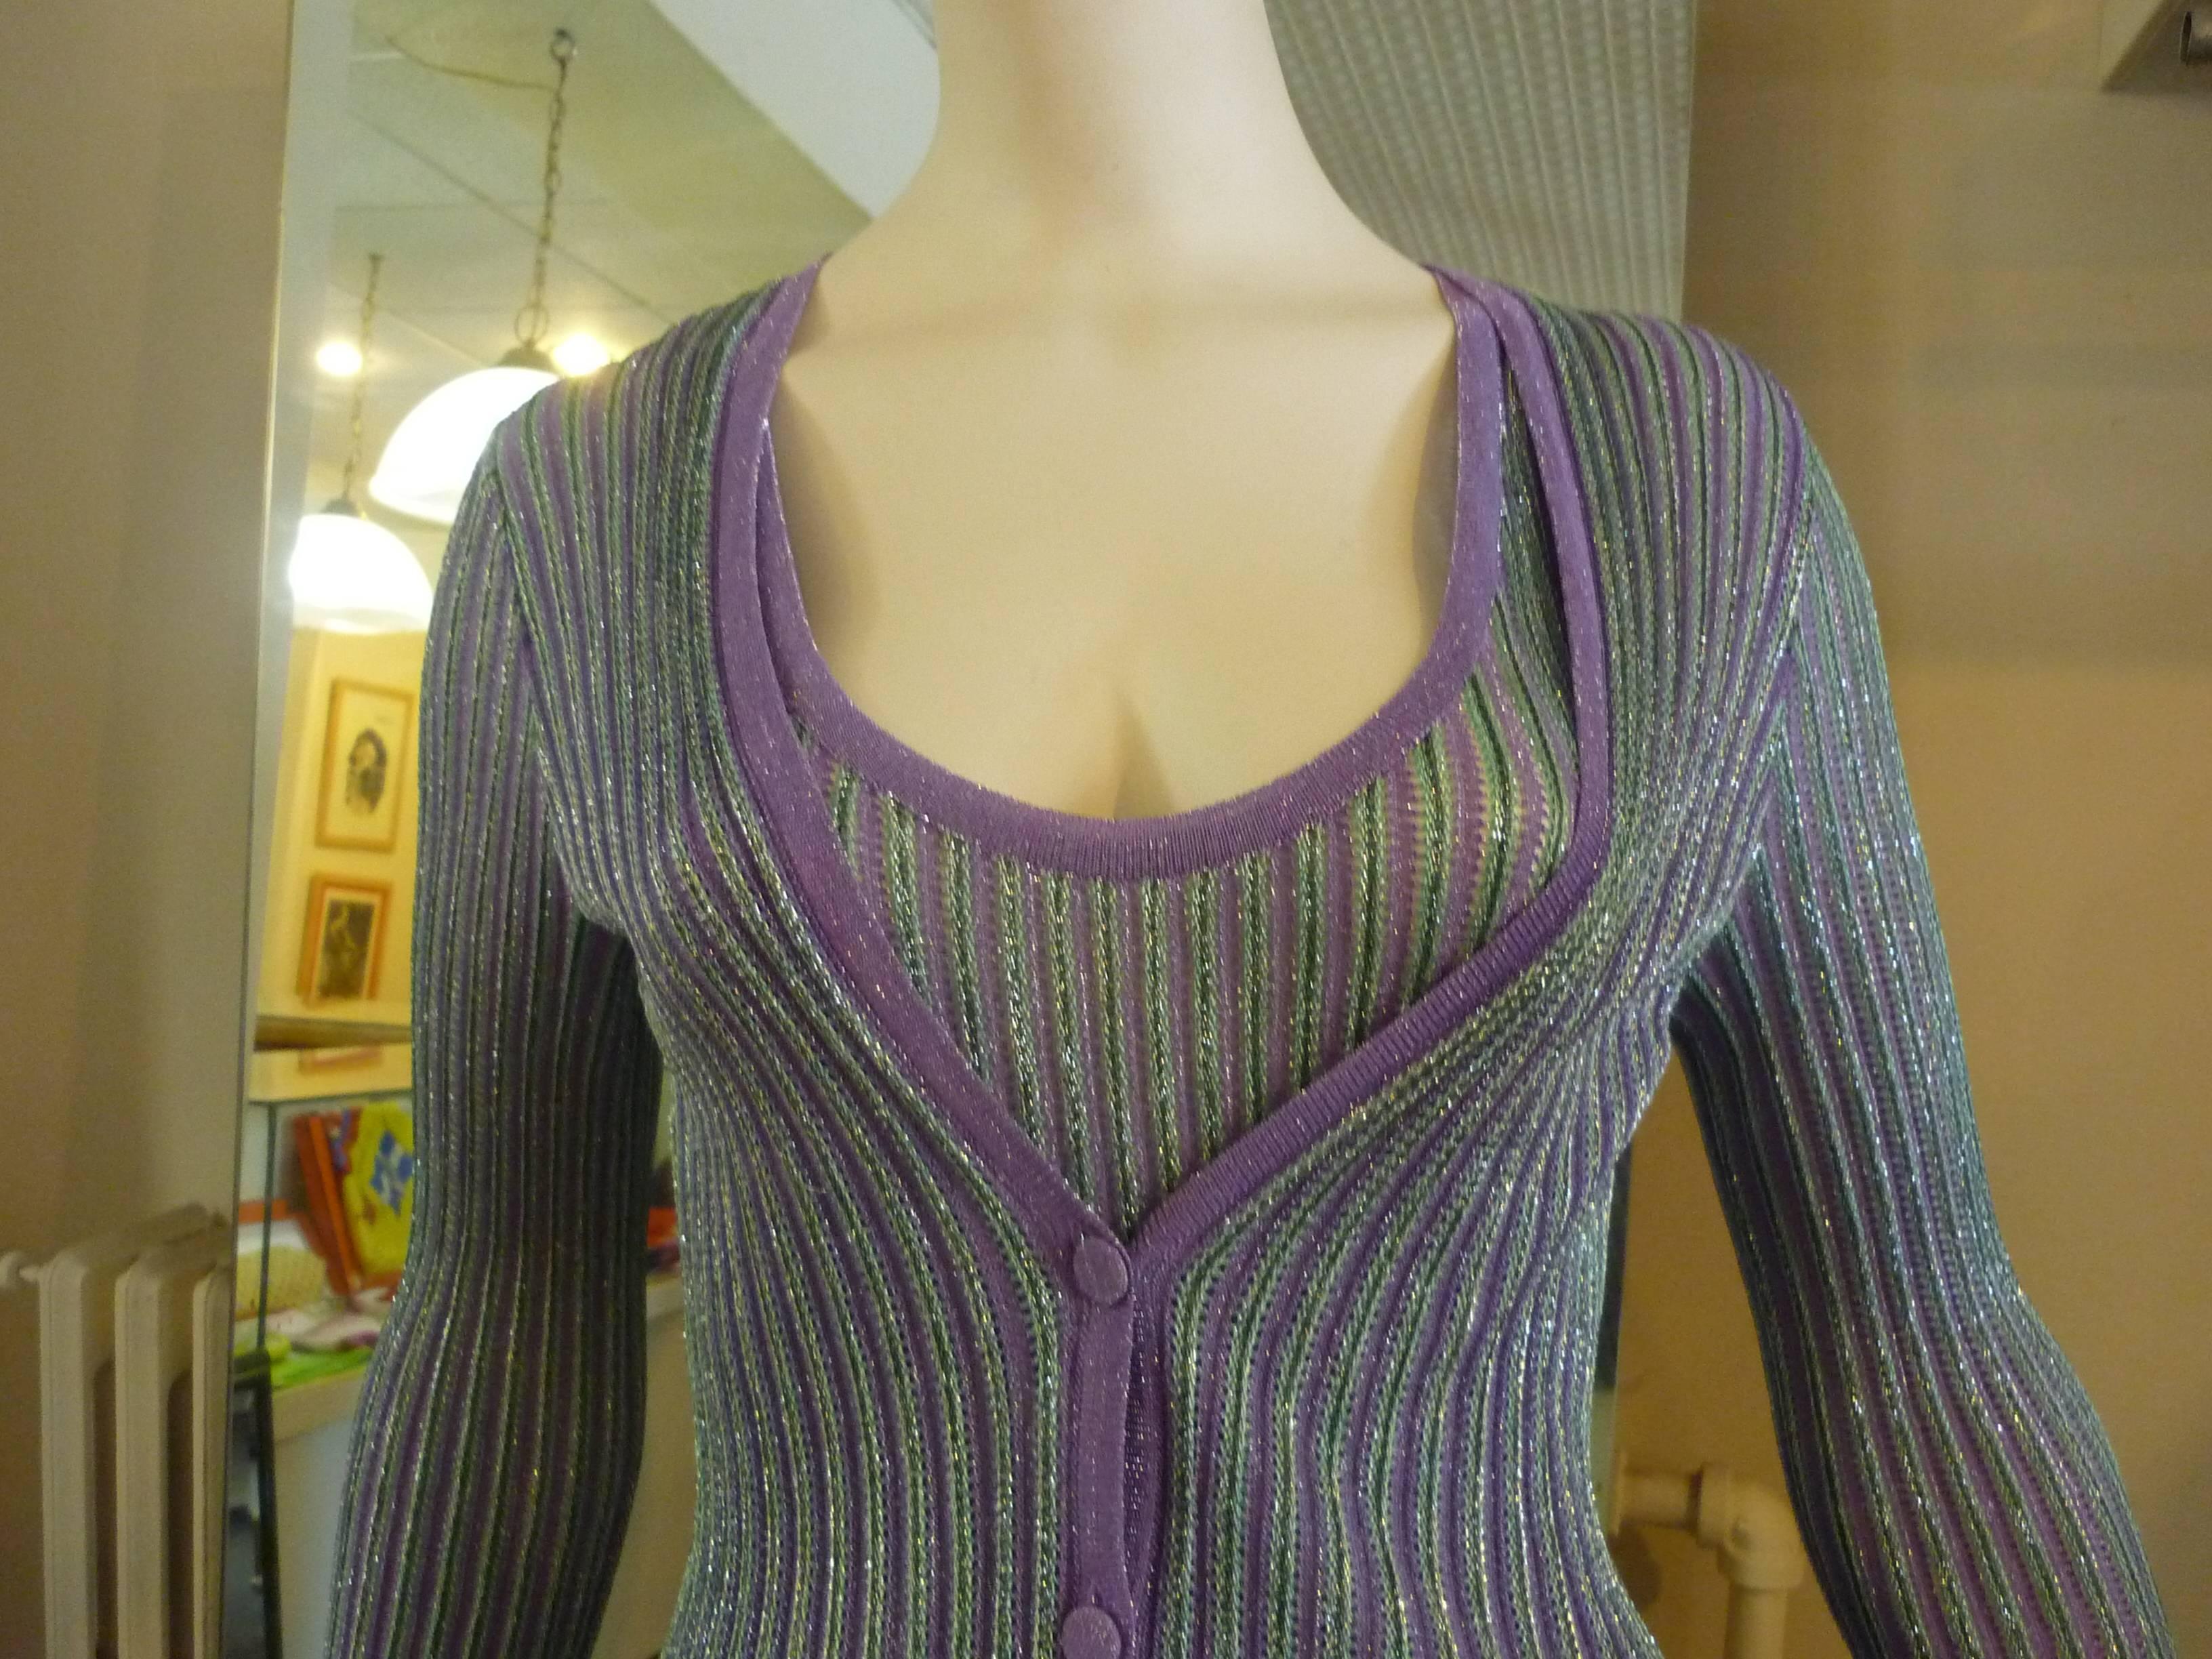 78% viscose and 22% nylon this lilac and green twin set is shot through with metal strands. The sleeveless top has a drawstring under the bust. The hems have a gondola effect, and closure for the cardigan is with covered buttons.